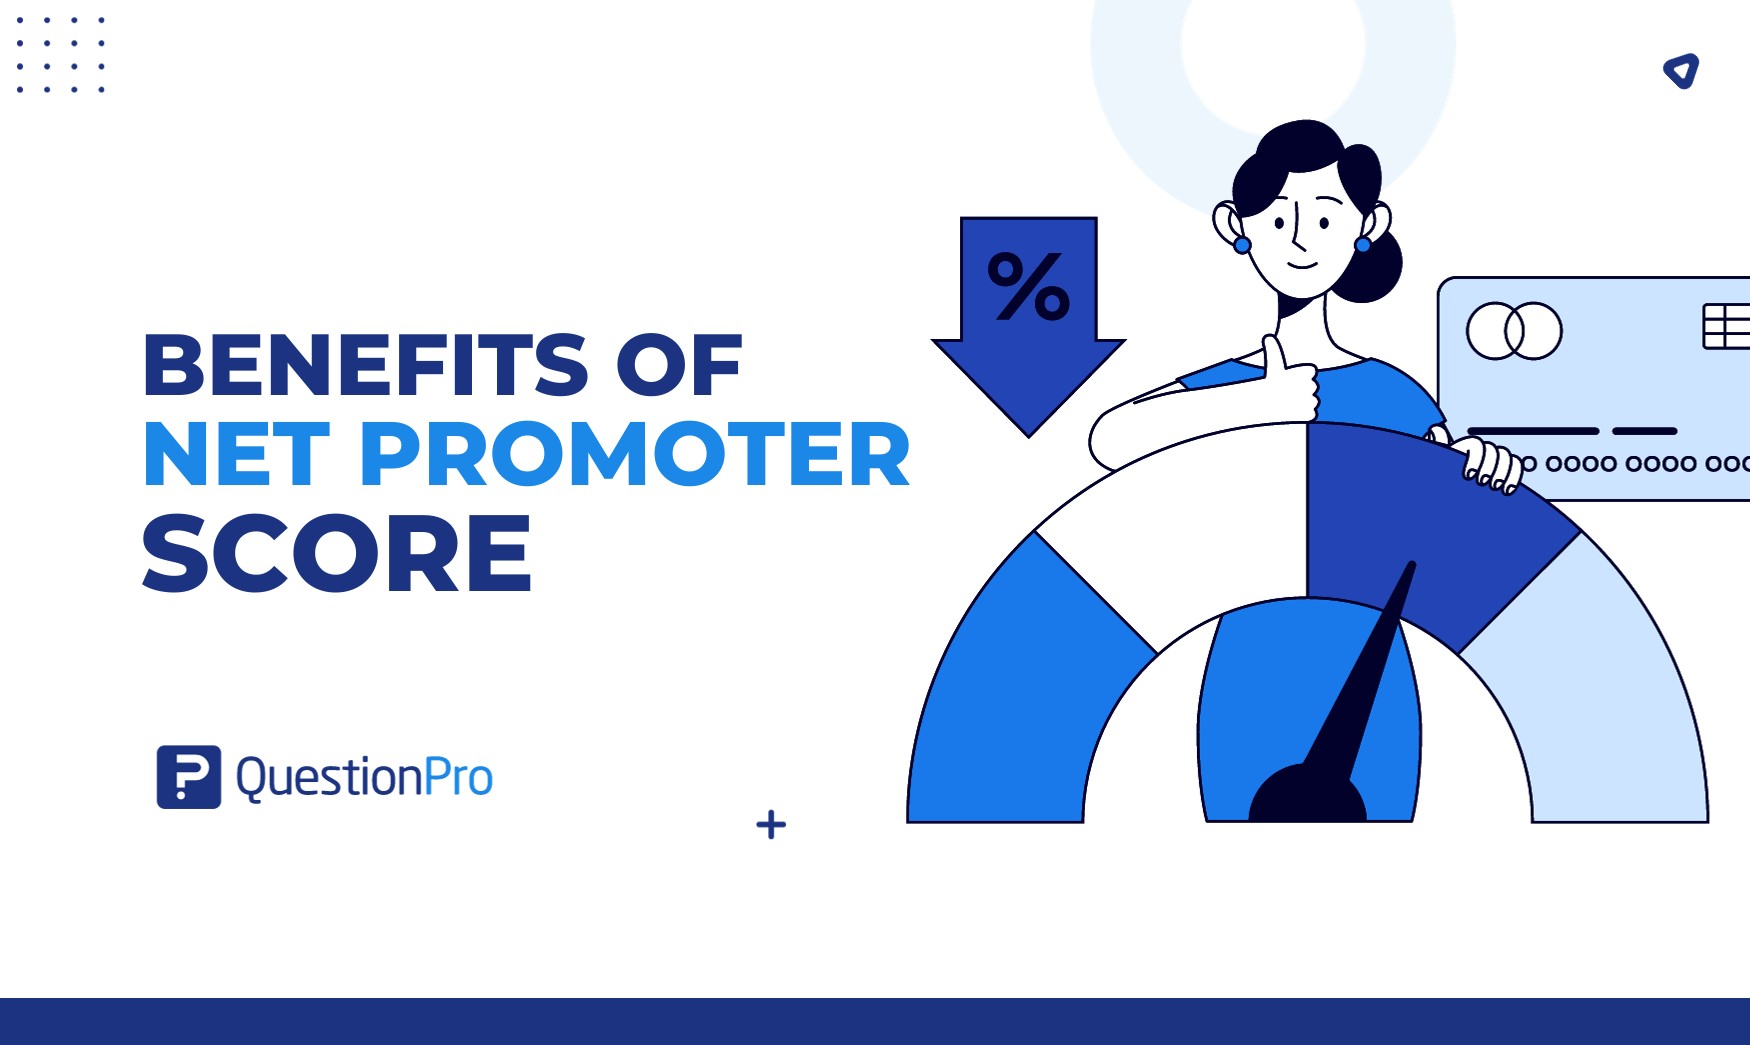 Discover the significant benefits of Net Promoter Score (NPS) and learn effective strategies to maximize its potential for business success.